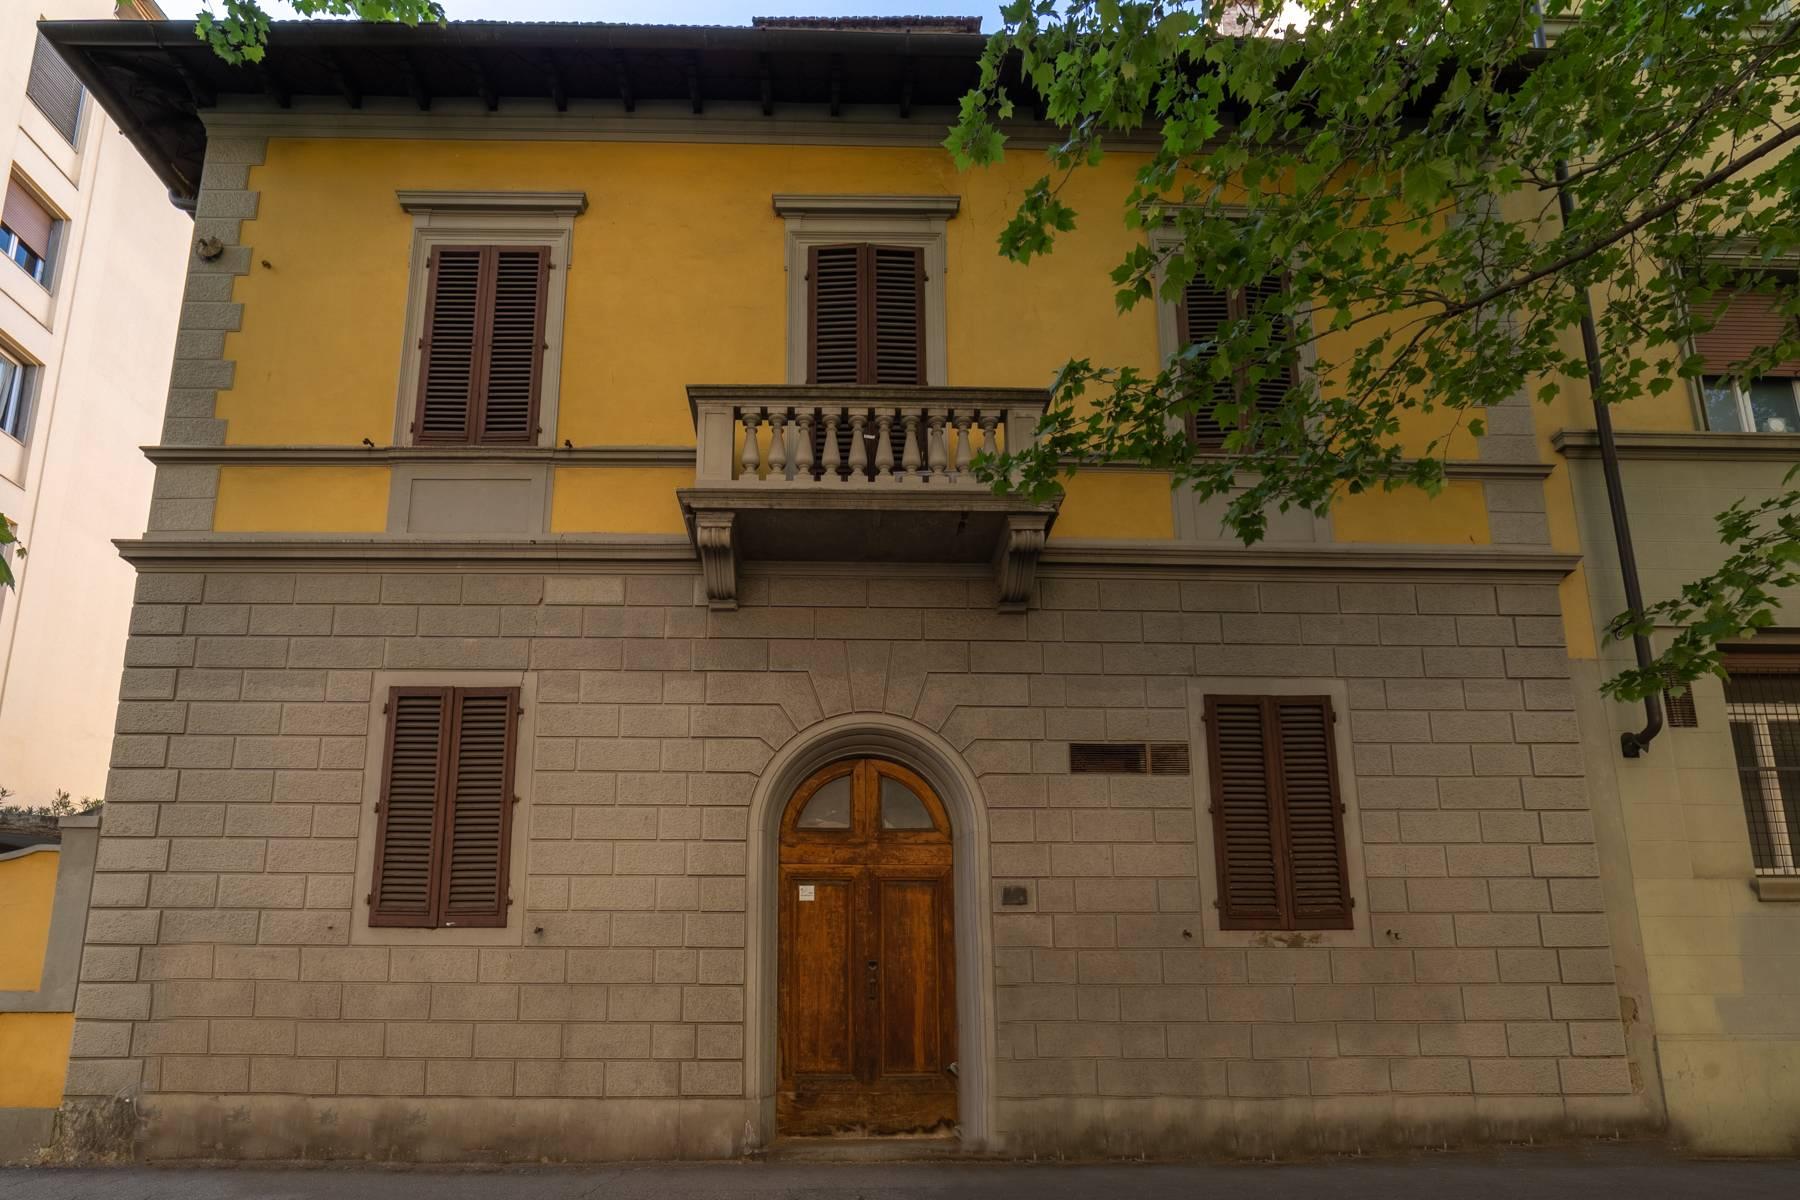 Two entire buildings in Beccaria residential area of Florence - 2